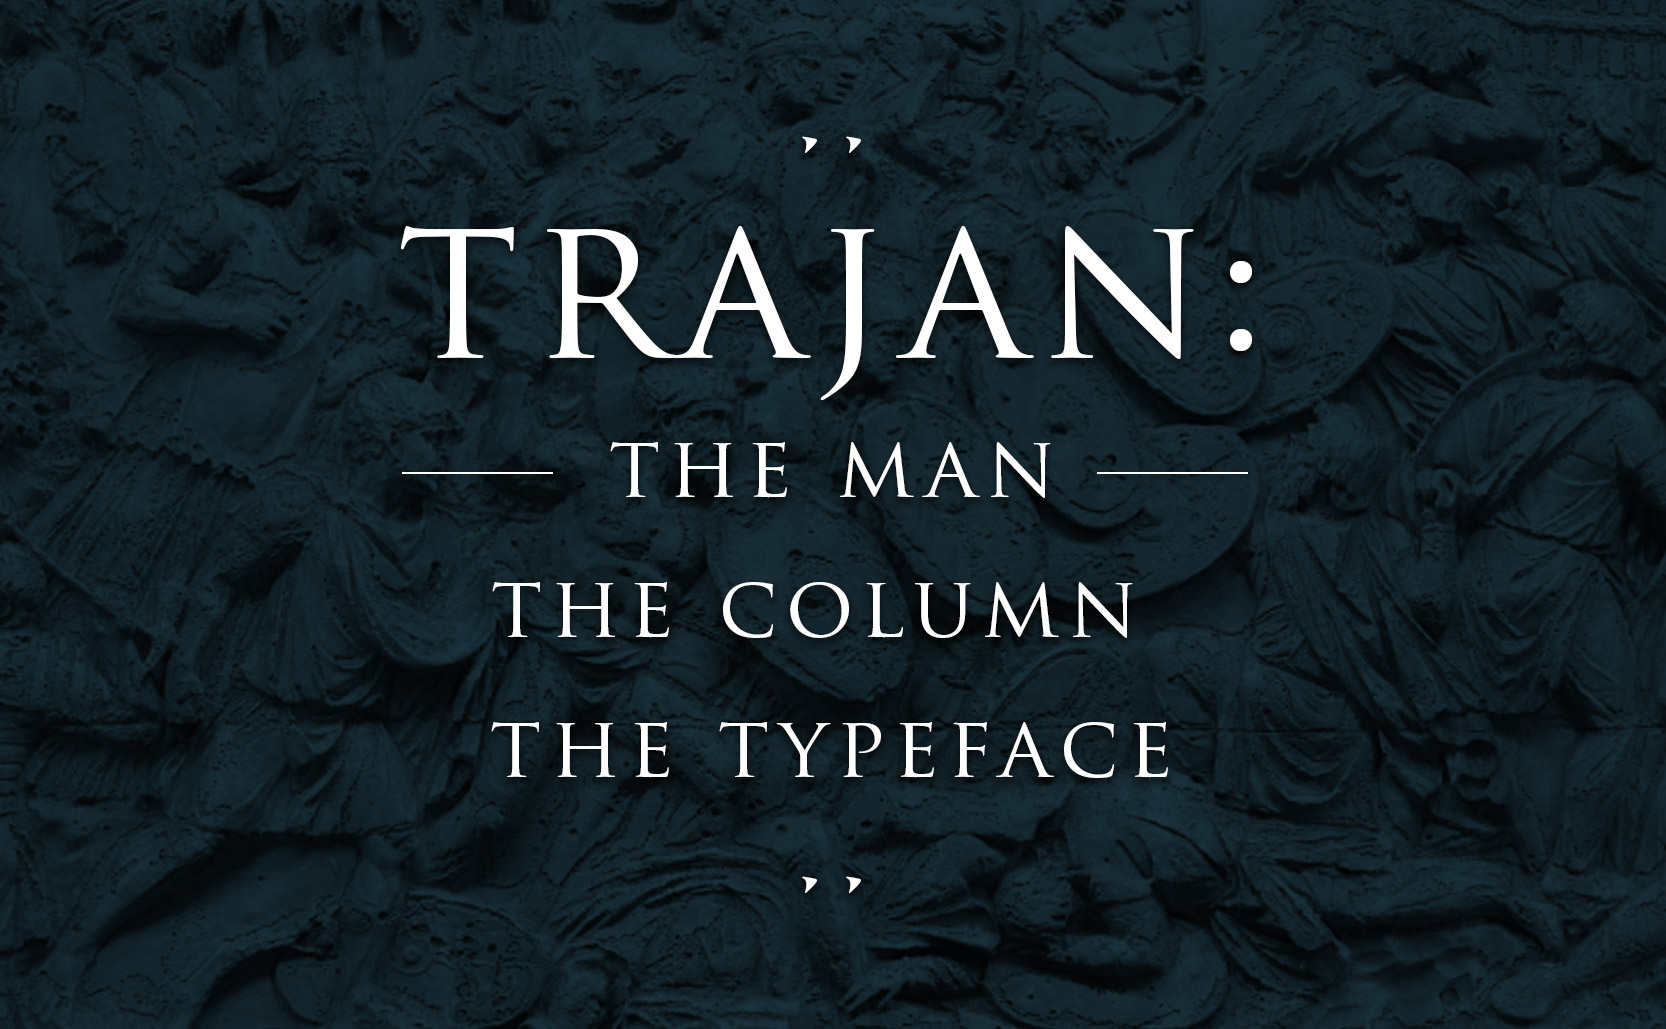 You are currently viewing Trajan: the man, the column, the typeface